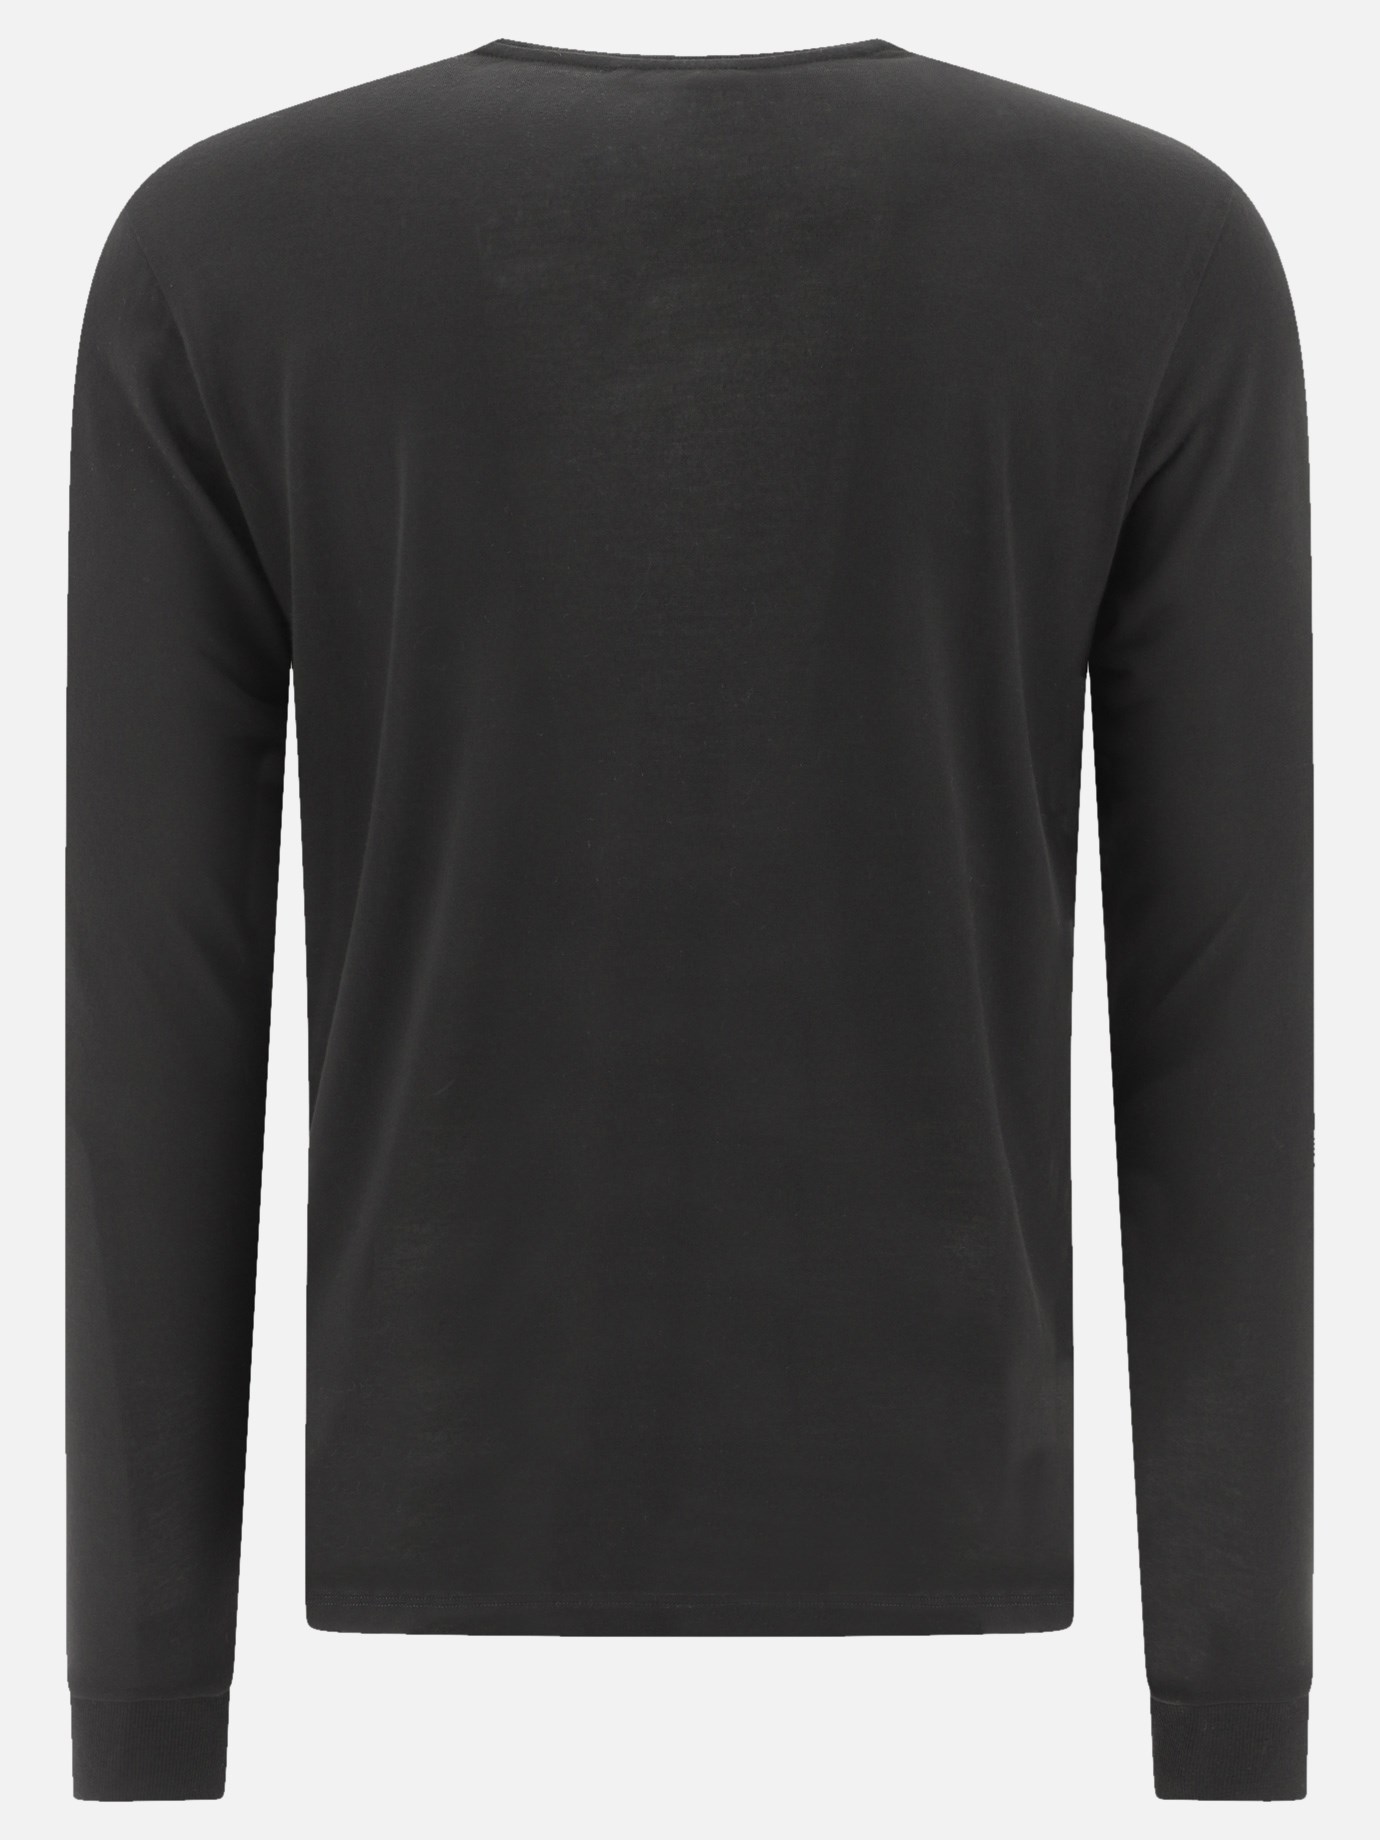 Four-button t-shirt by Tom Ford